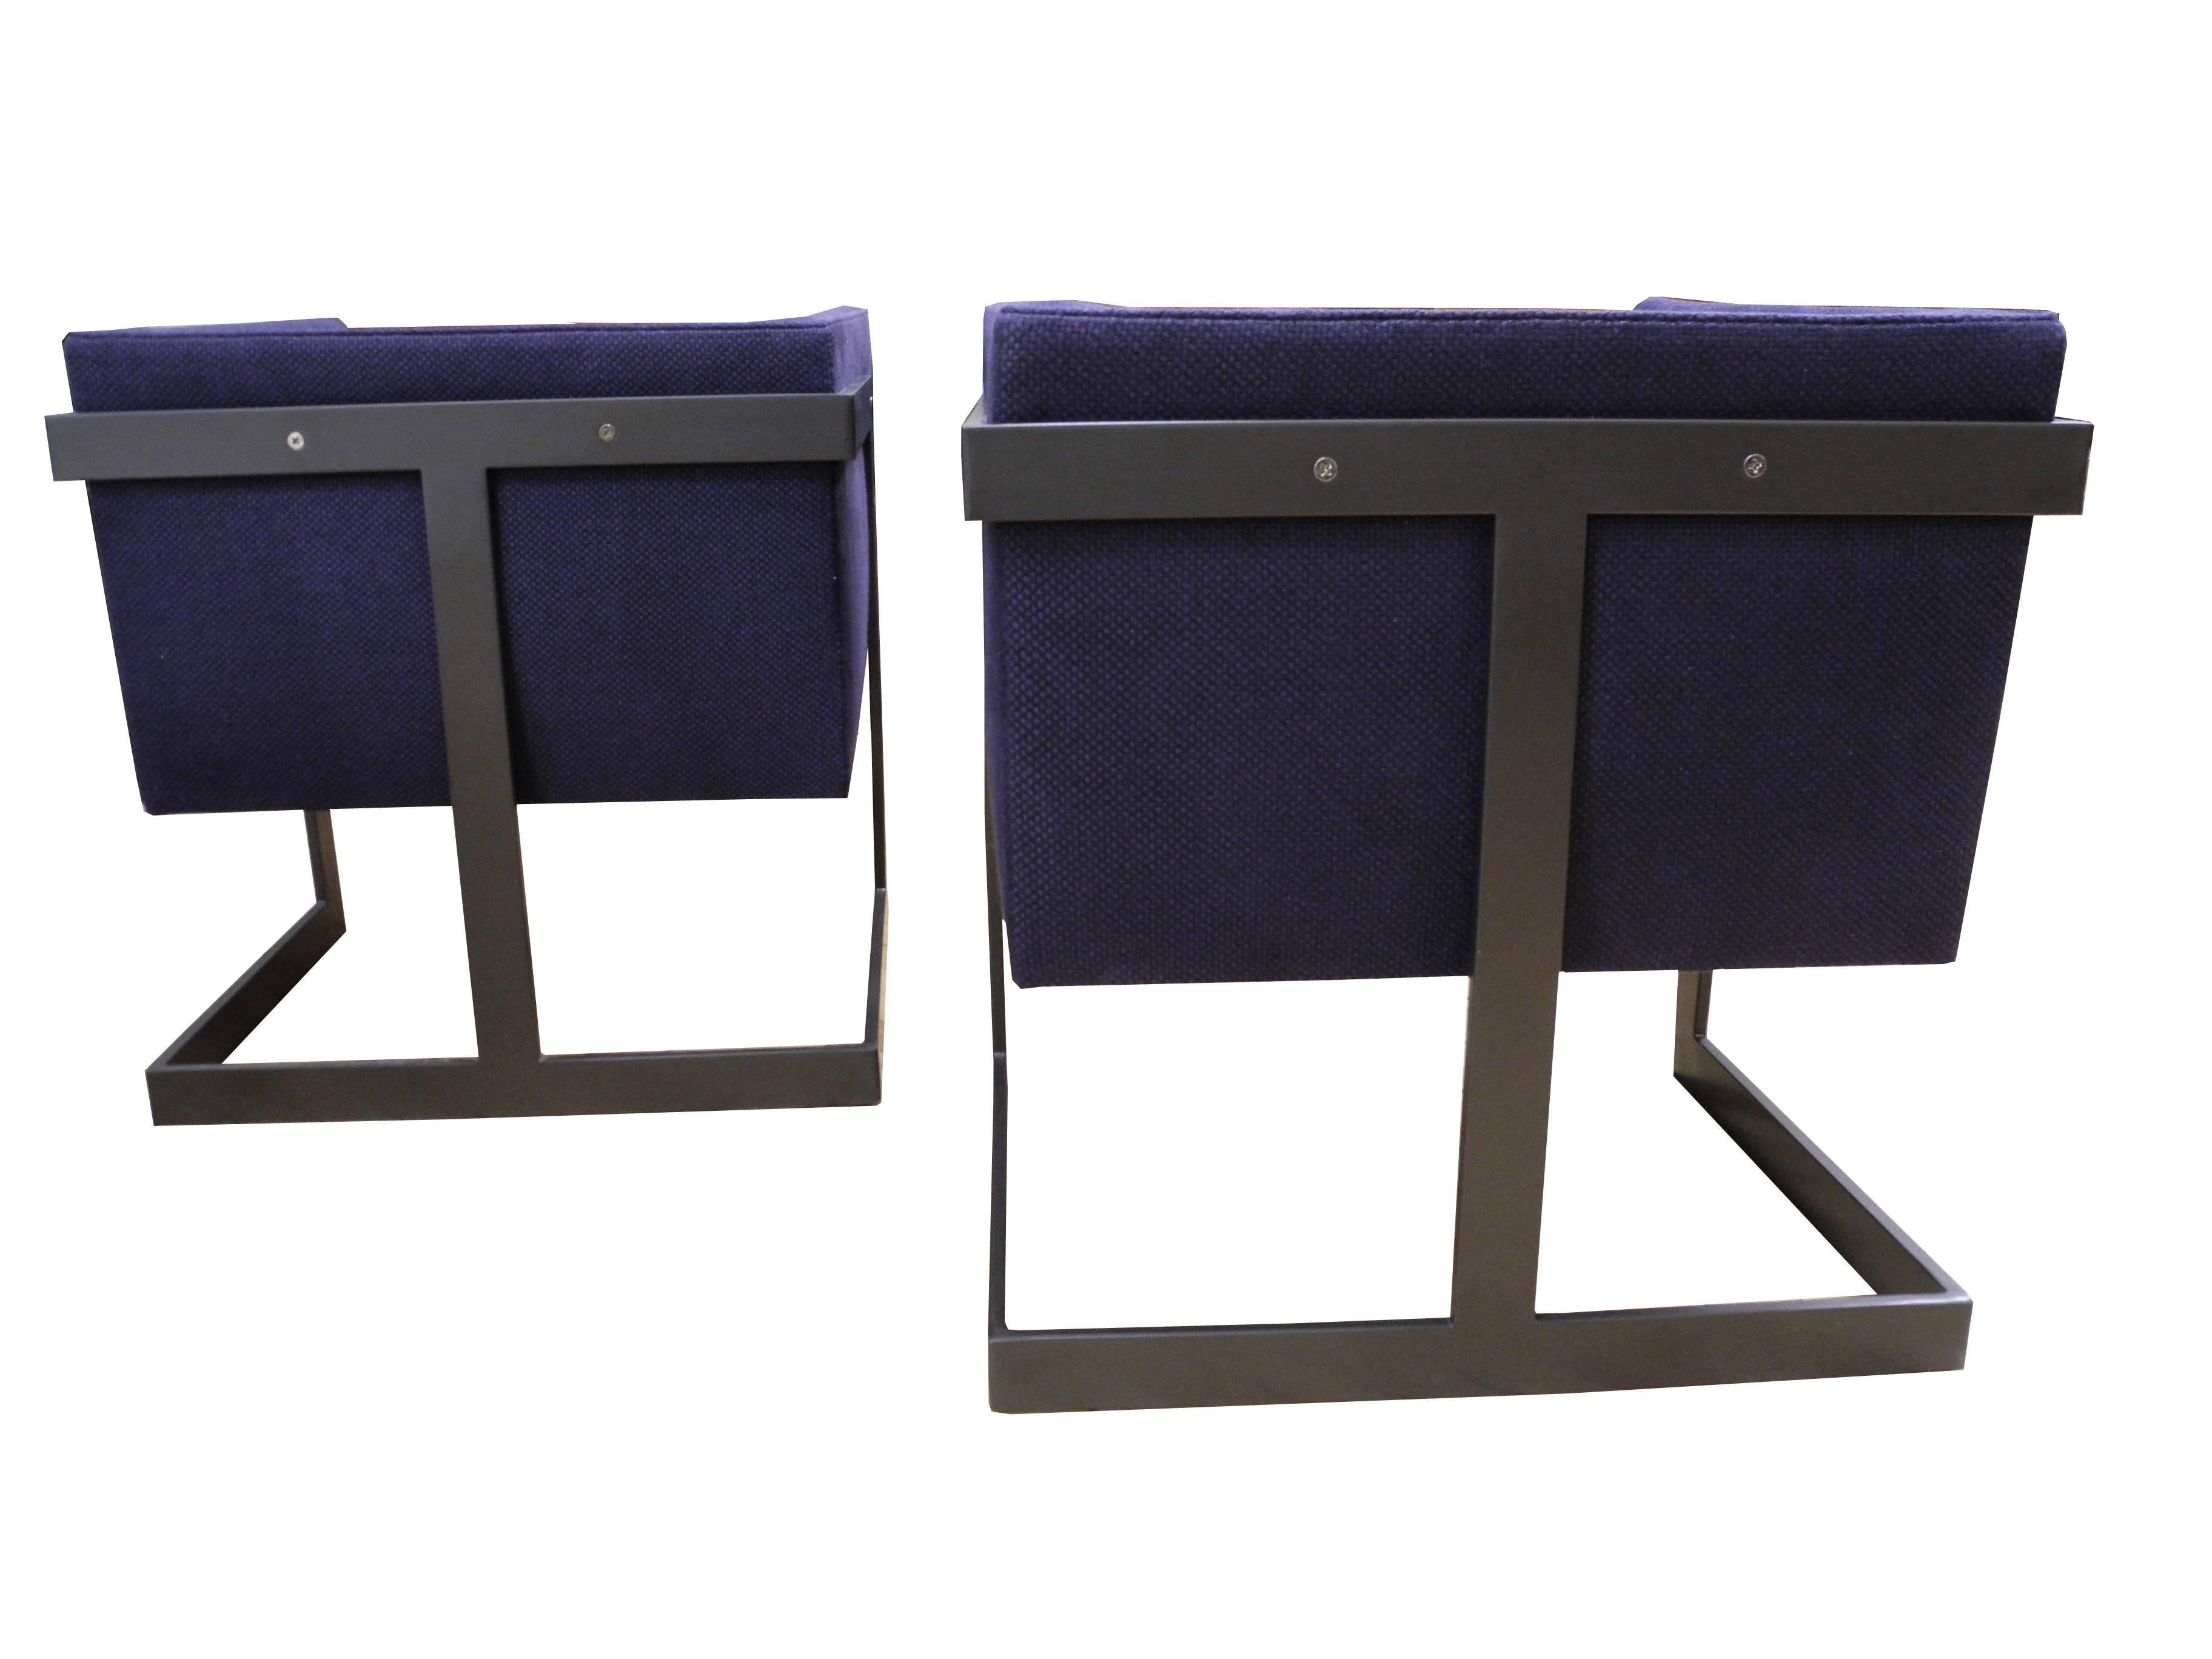 20th Century Pair of Petite Modern Bronze and Navy Cubed Armchairs by Milo Baughman